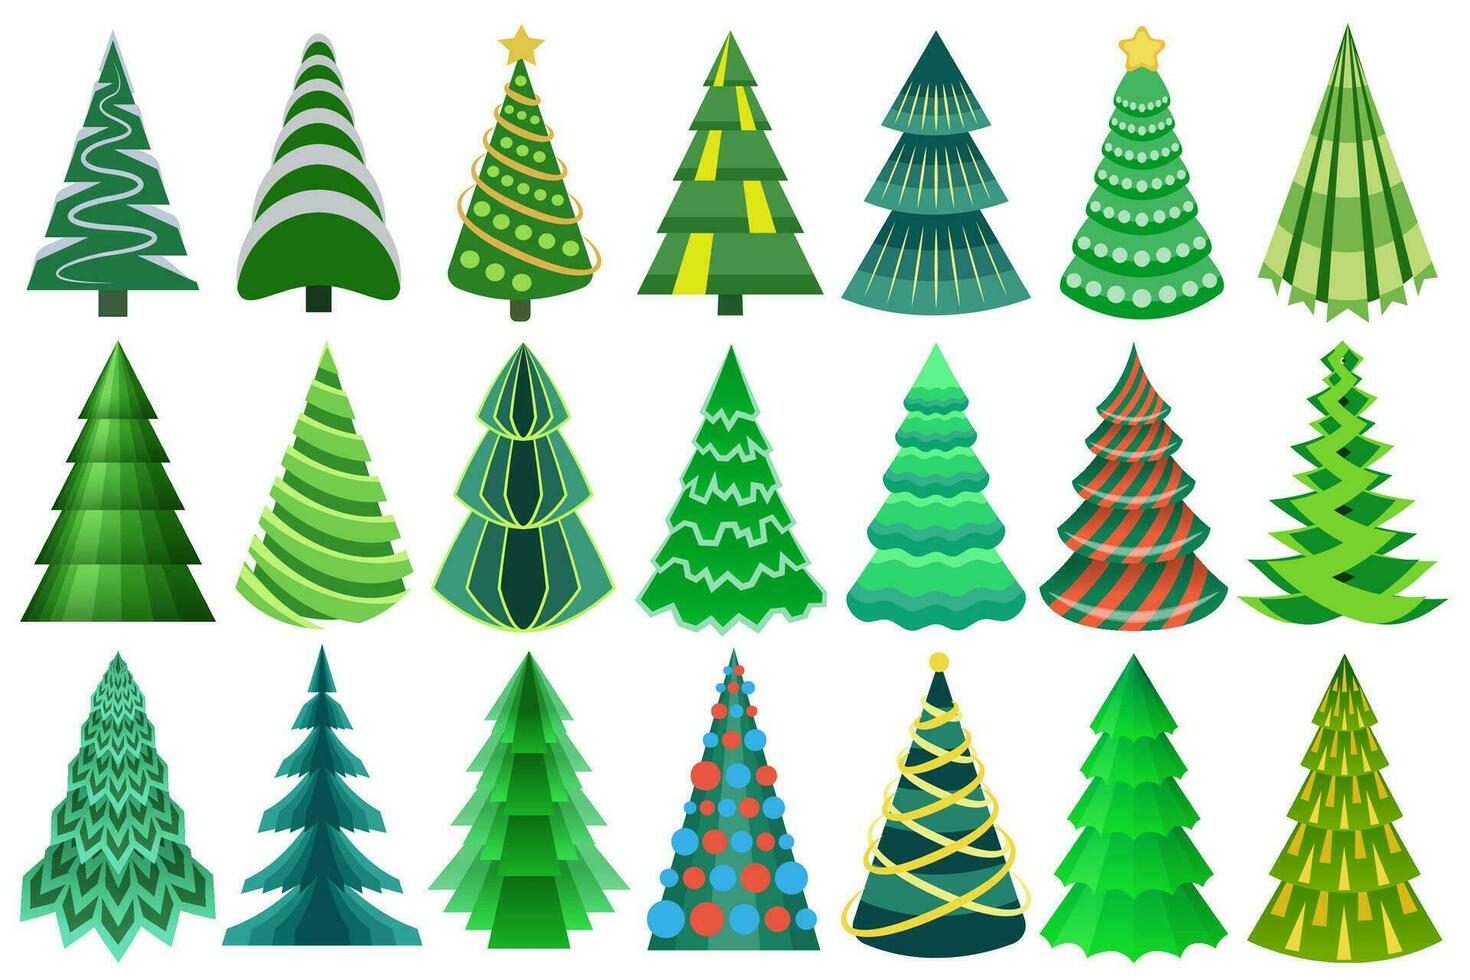 Stylized, decorative Christmas tree set. Awesome abstract, flat Christmas trees collection for your designs. vector